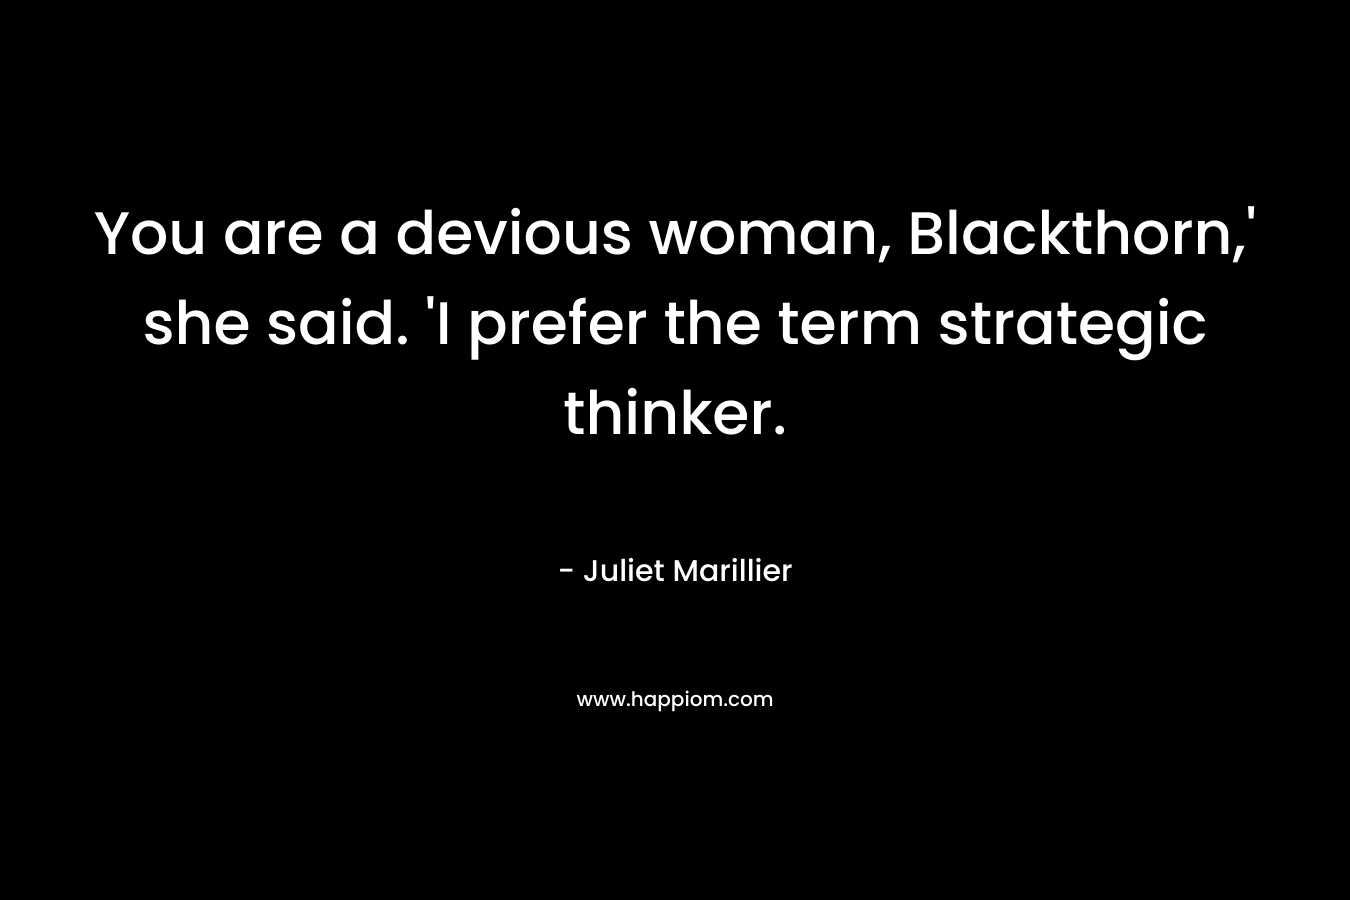 You are a devious woman, Blackthorn,' she said. 'I prefer the term strategic thinker.